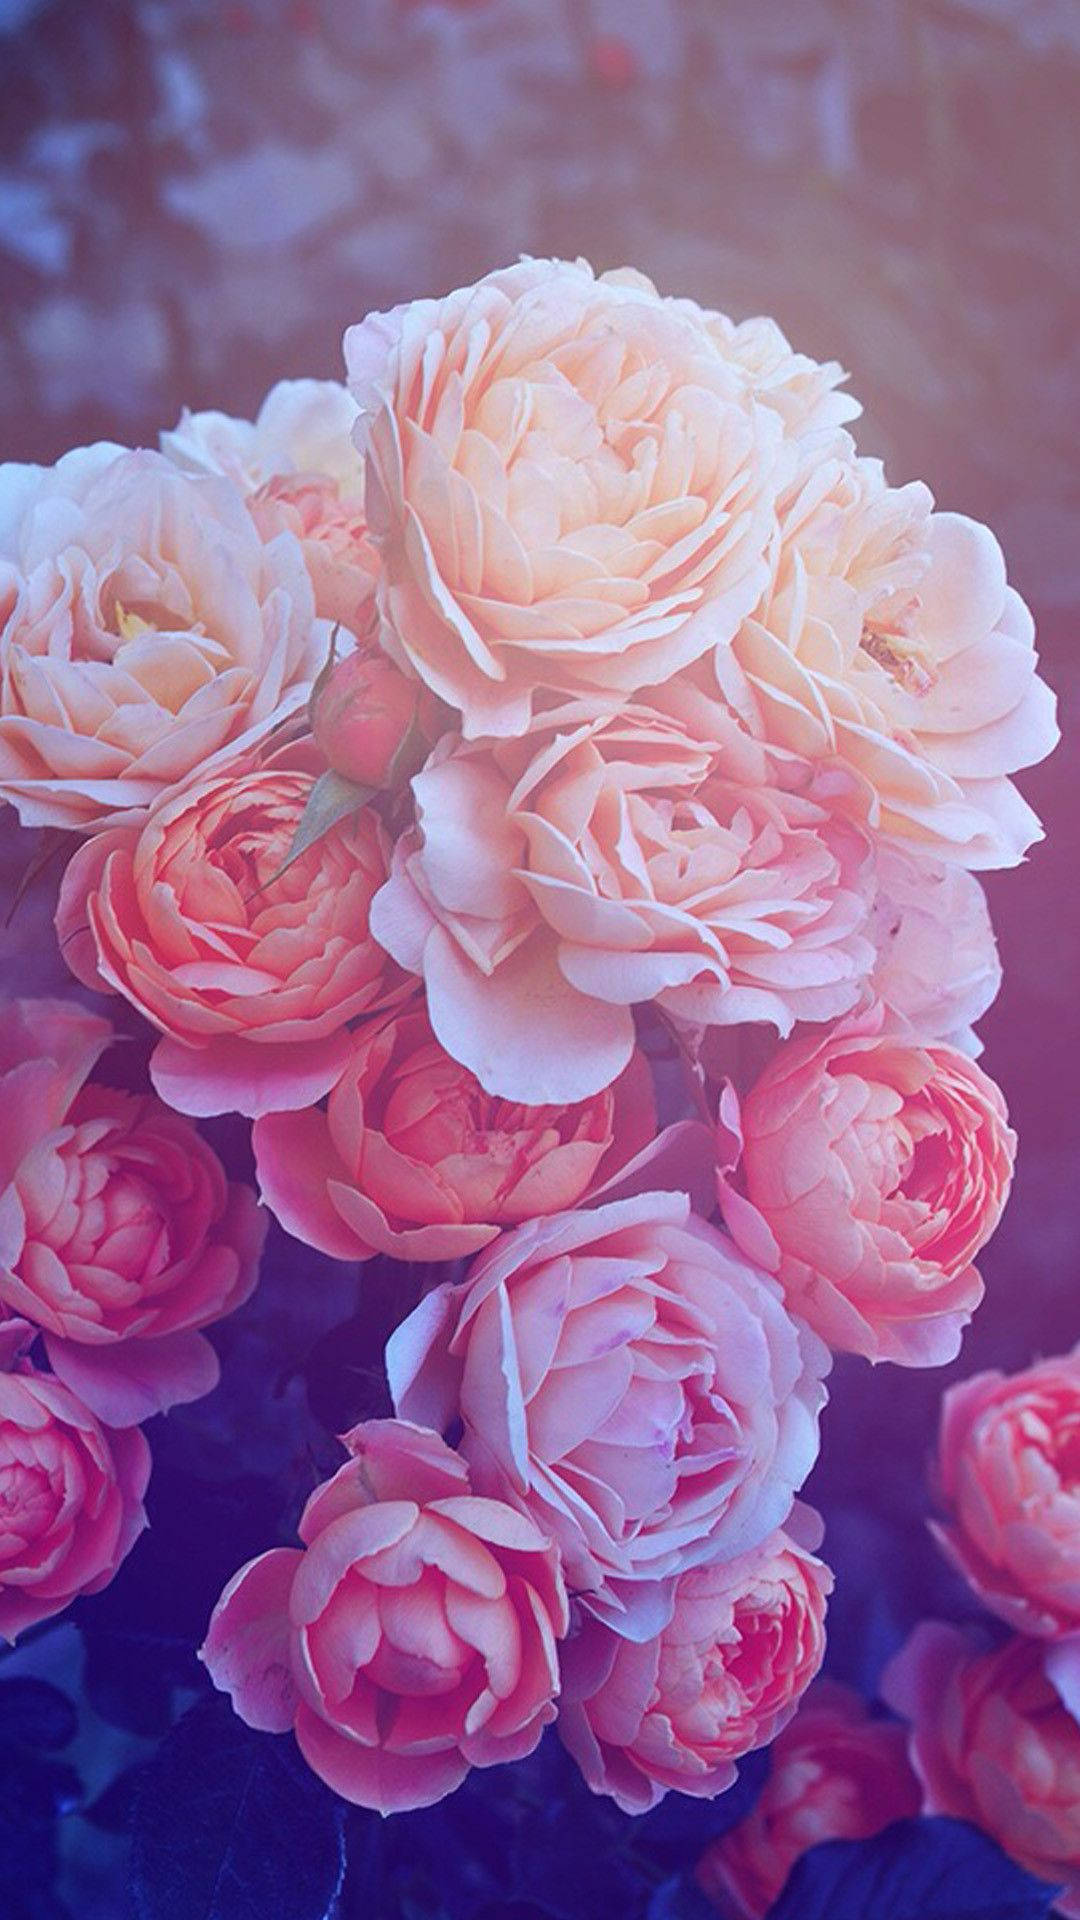 White, Peach And Pink Rose Iphone Background Background